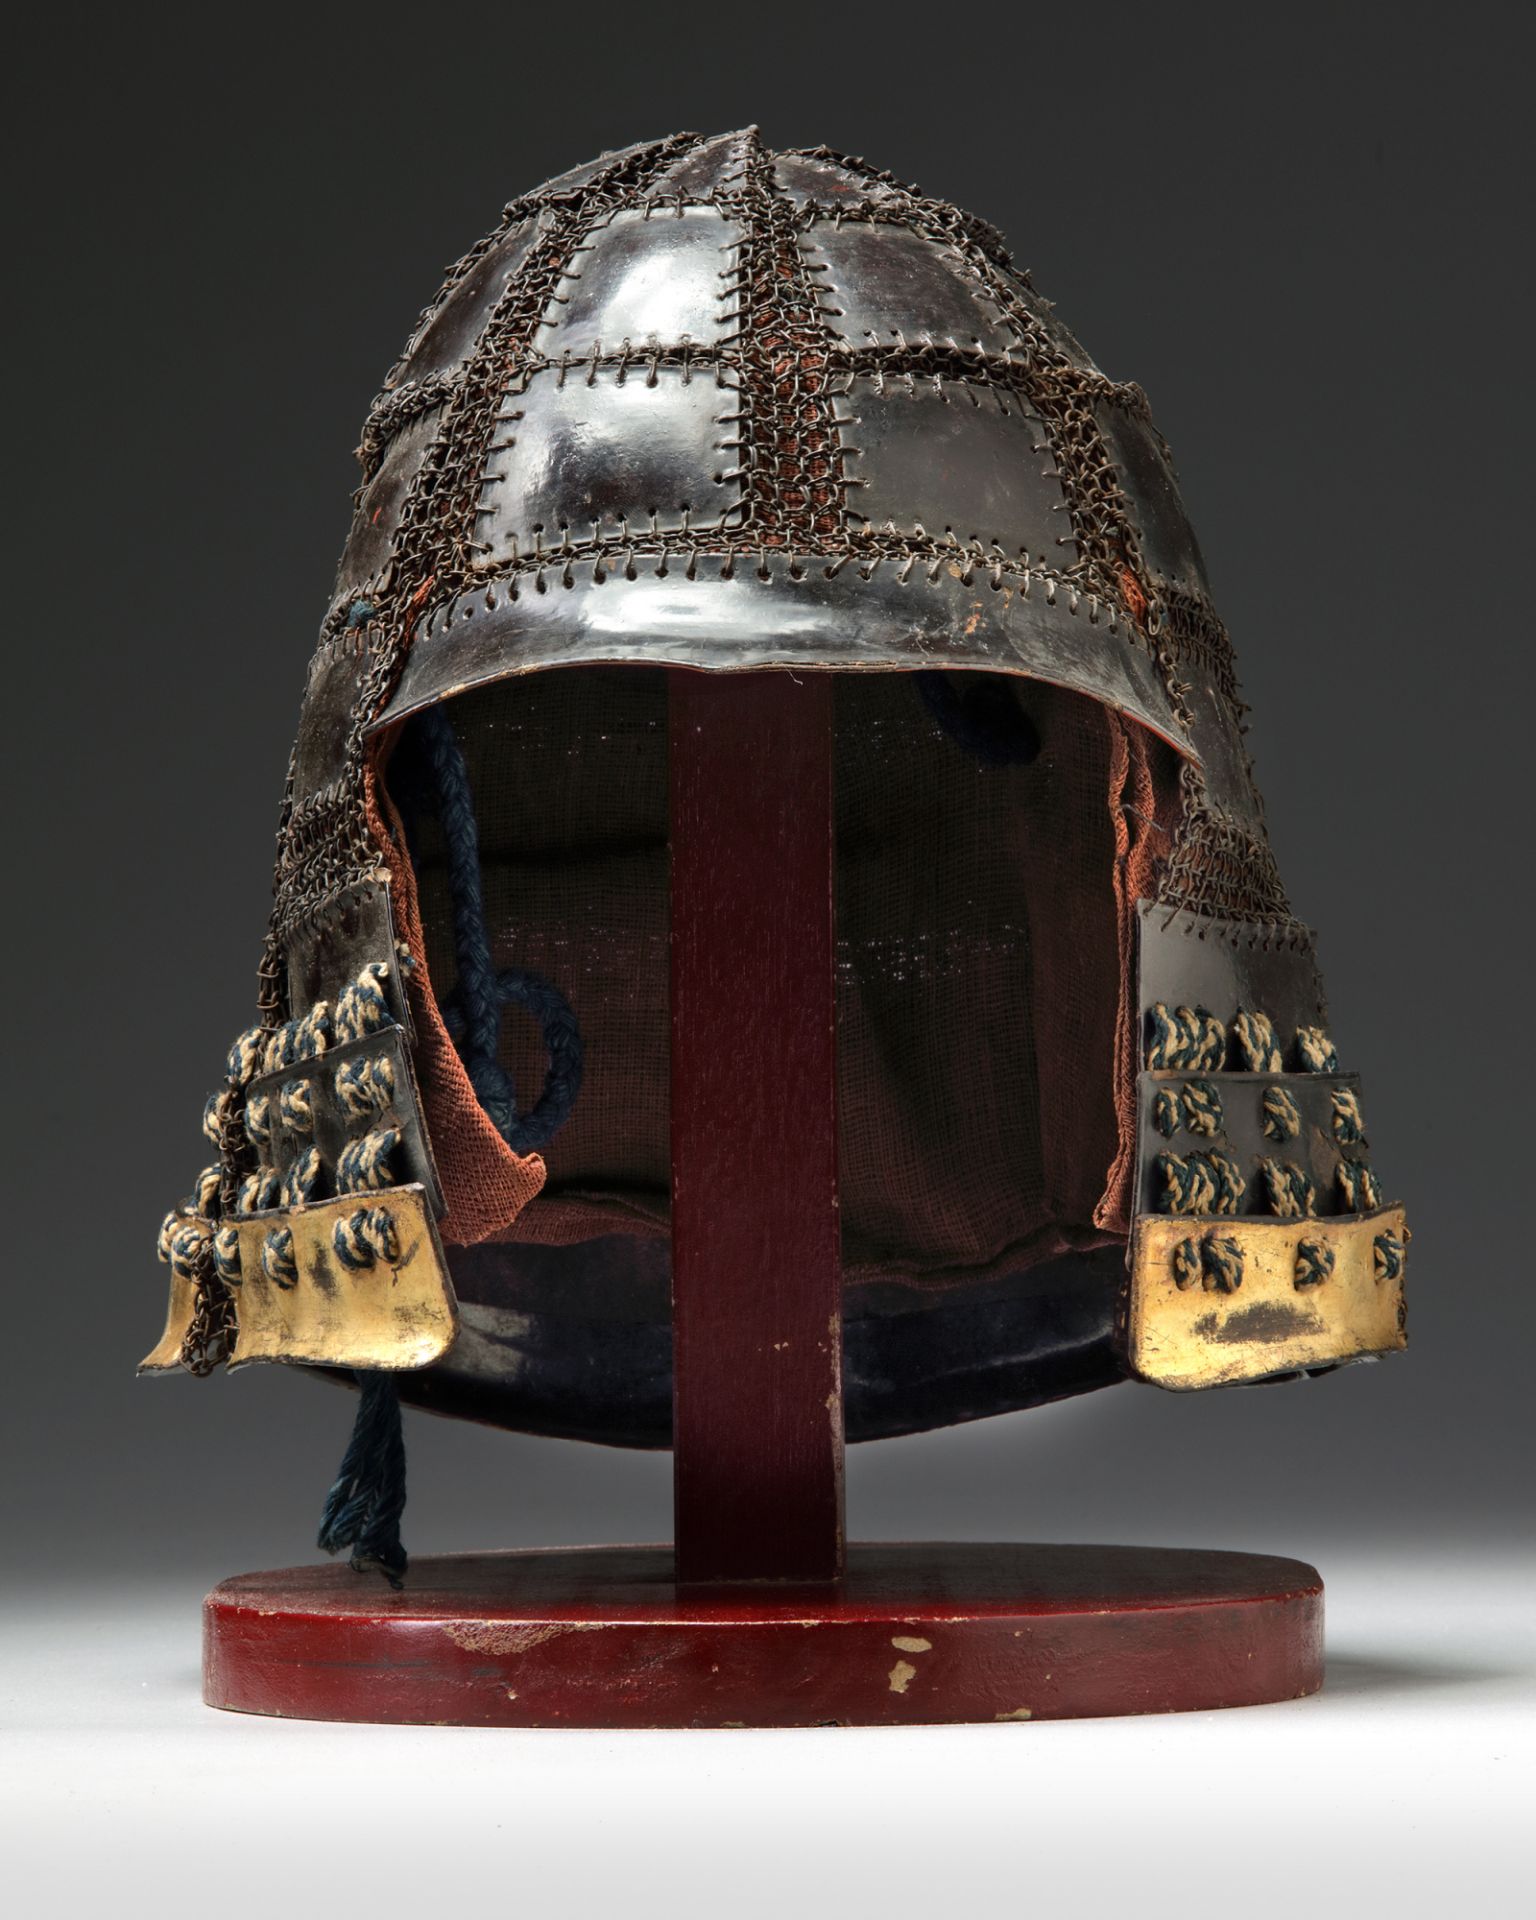 A JAPANESE WARRIOR HELMET (KABUTO) CONSISTING OF BLACK LACQUERED METAL PLATES - Image 3 of 4